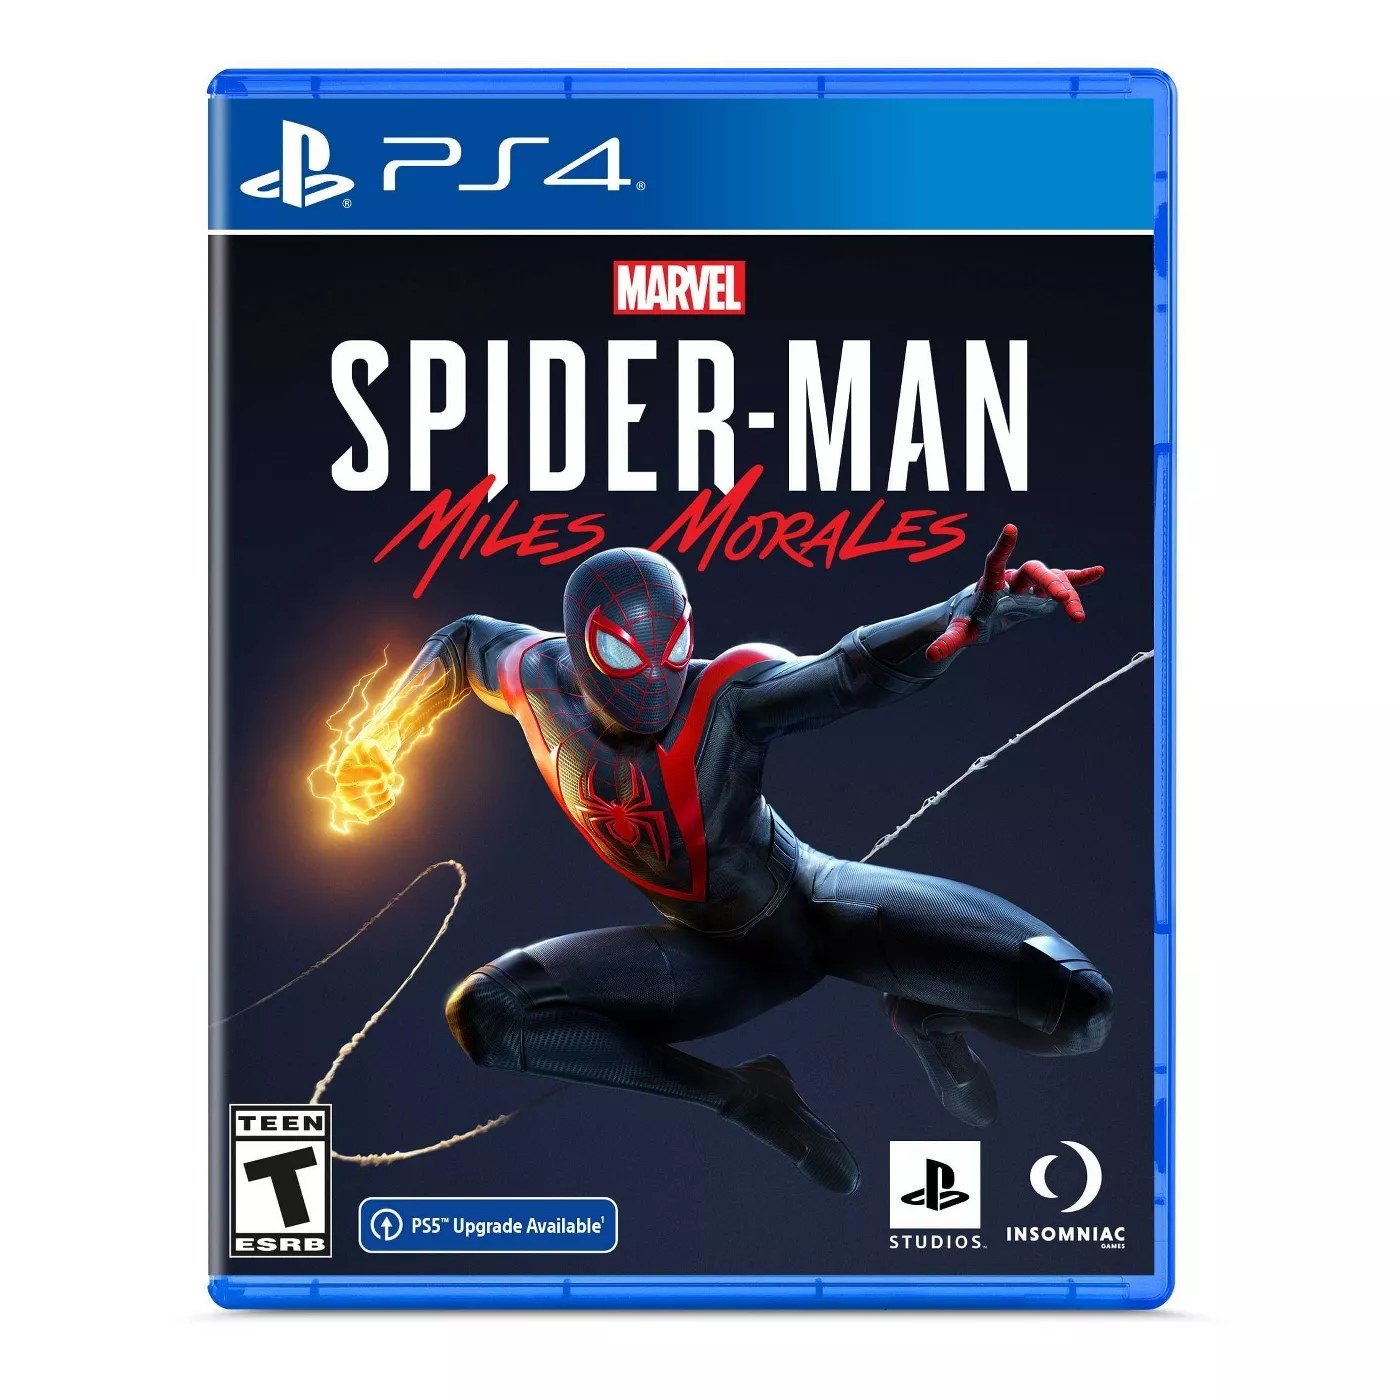 The Spider-Man Miles Morales video game